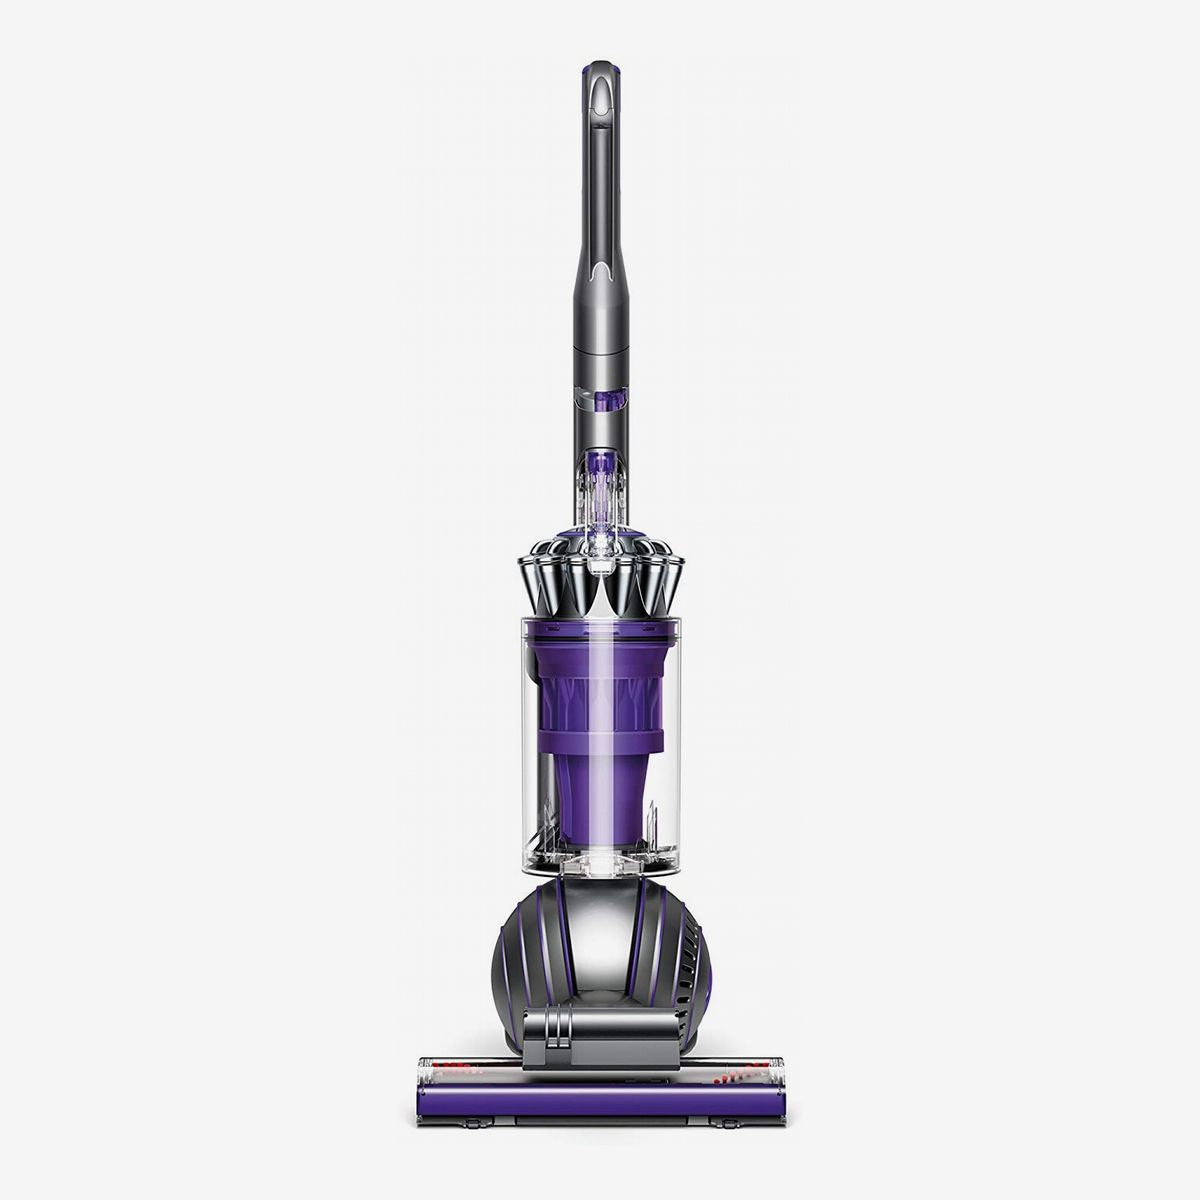 18 Best Vacuums For Pet Hair 2021 The, Best Vacuum Cleaner For Hardwood Floors And Pet Hair